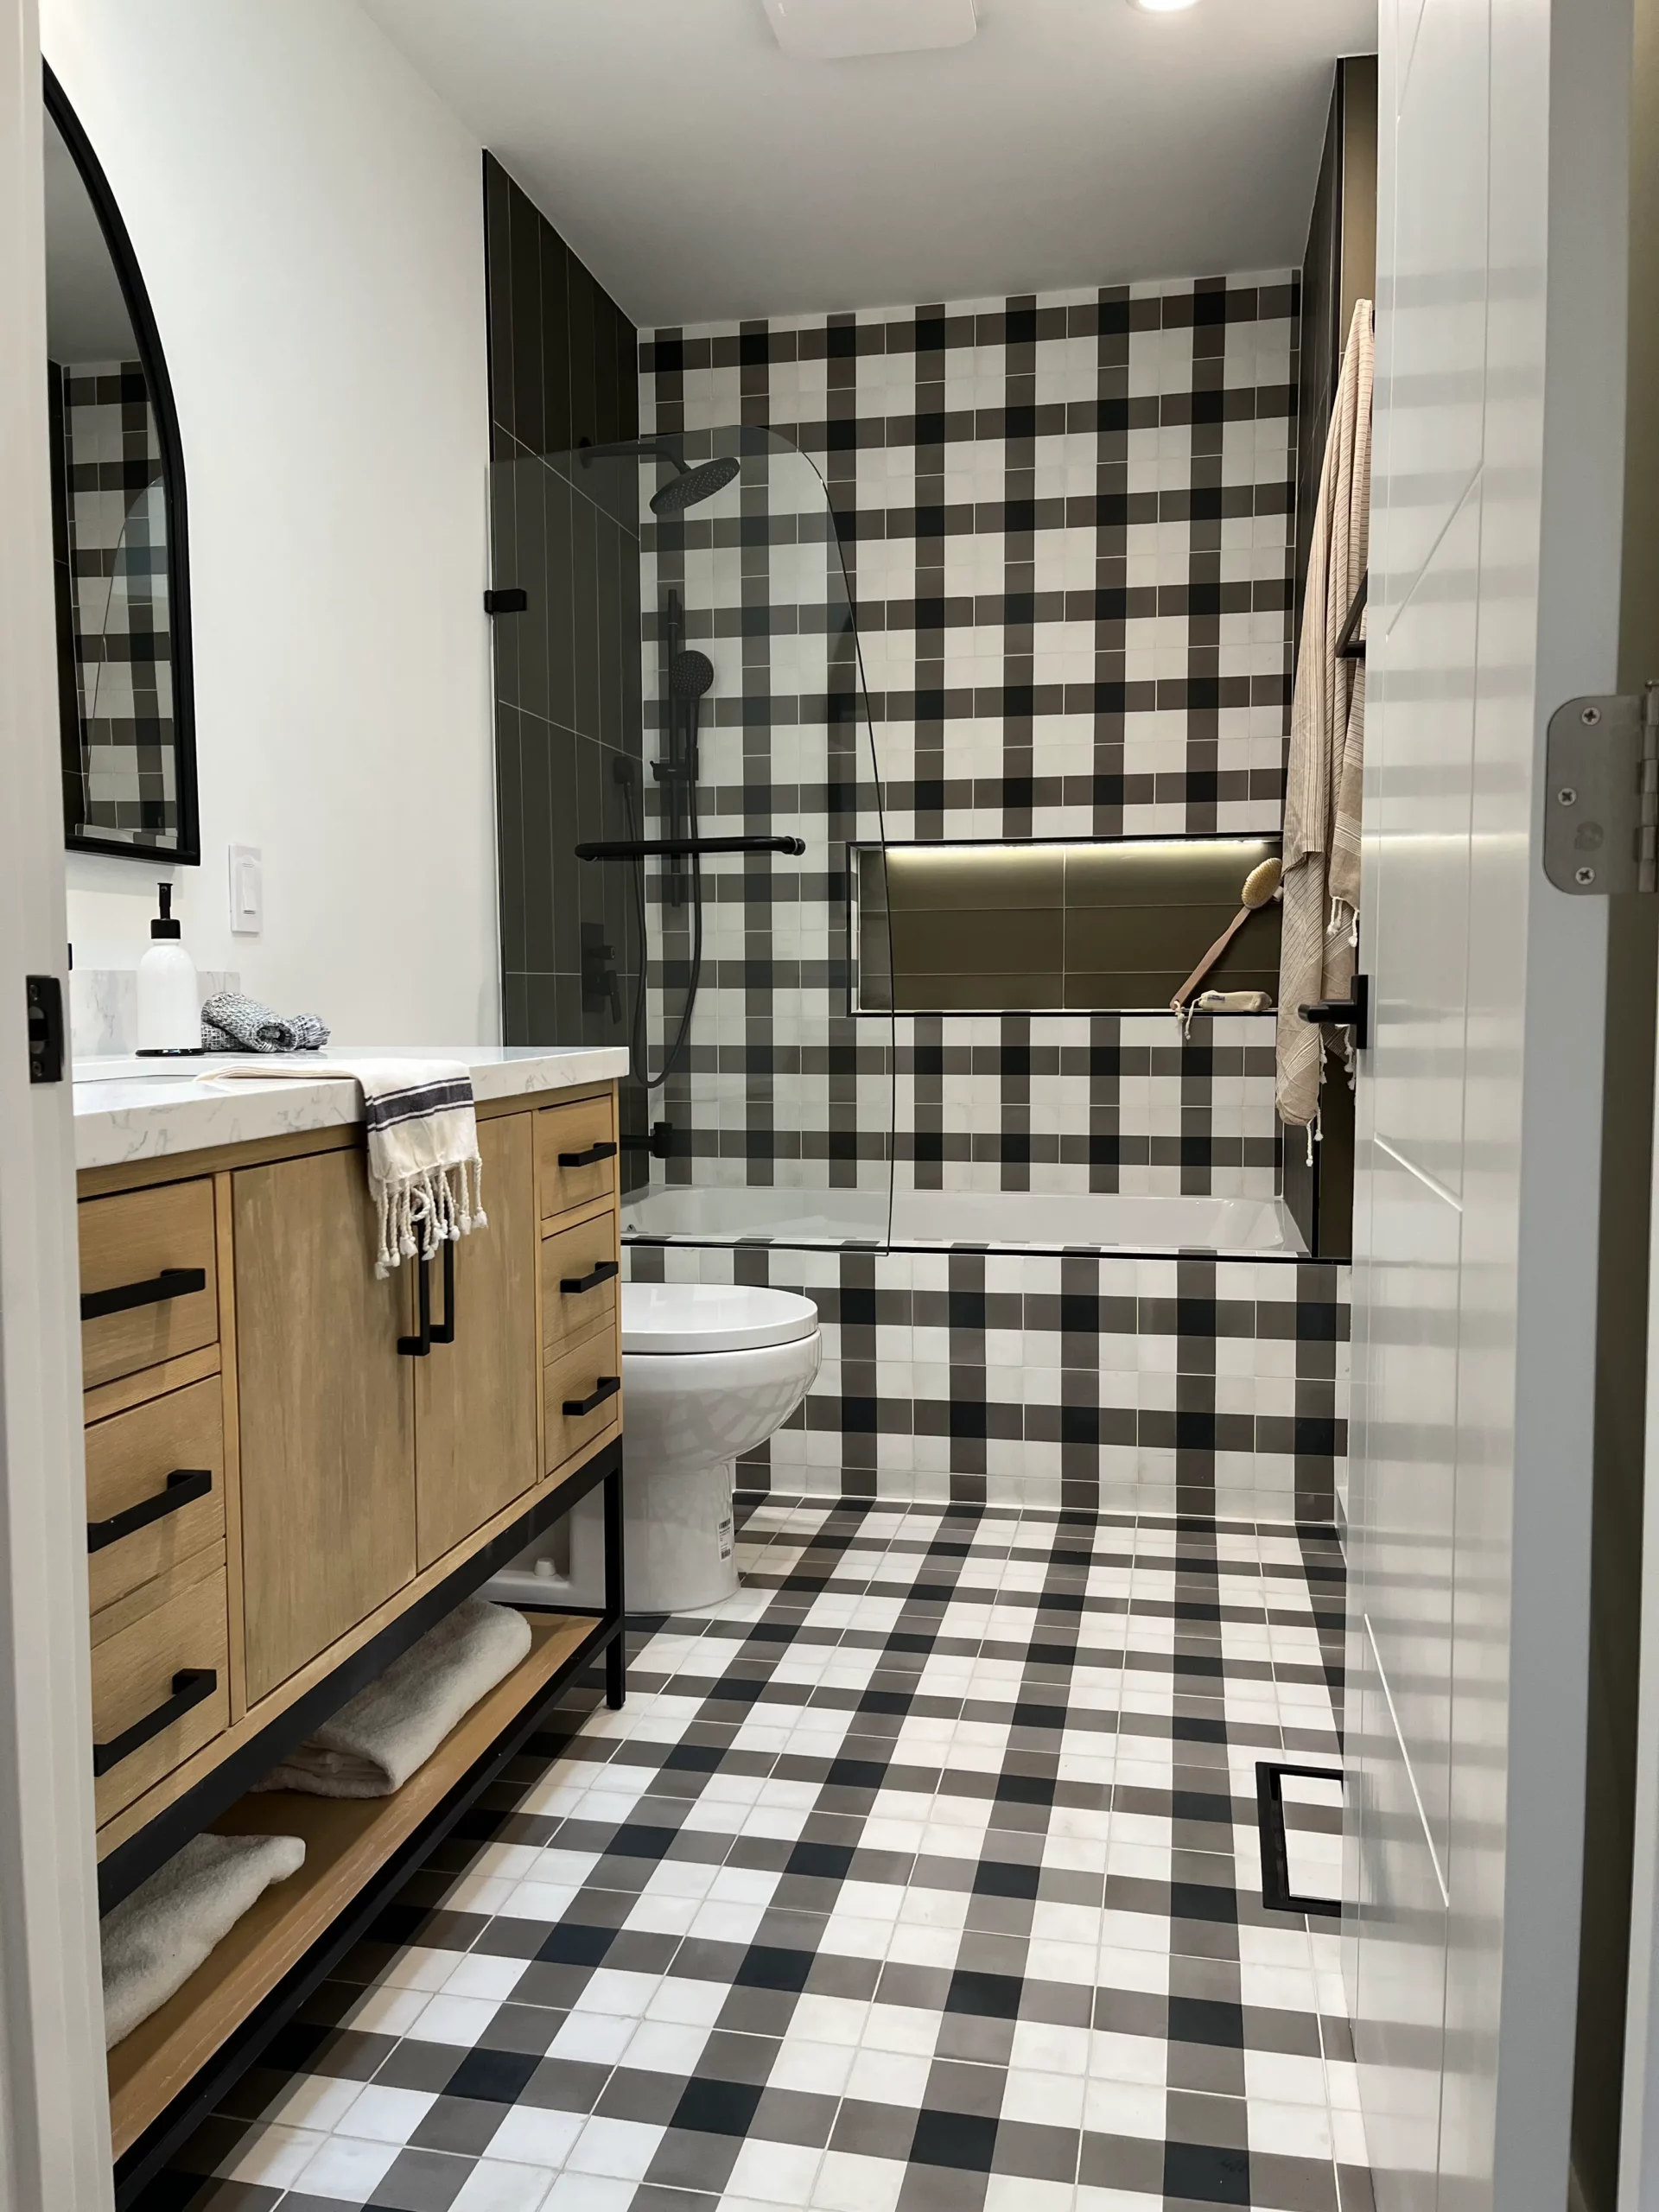 A bathroom with a black and white checkered floor.